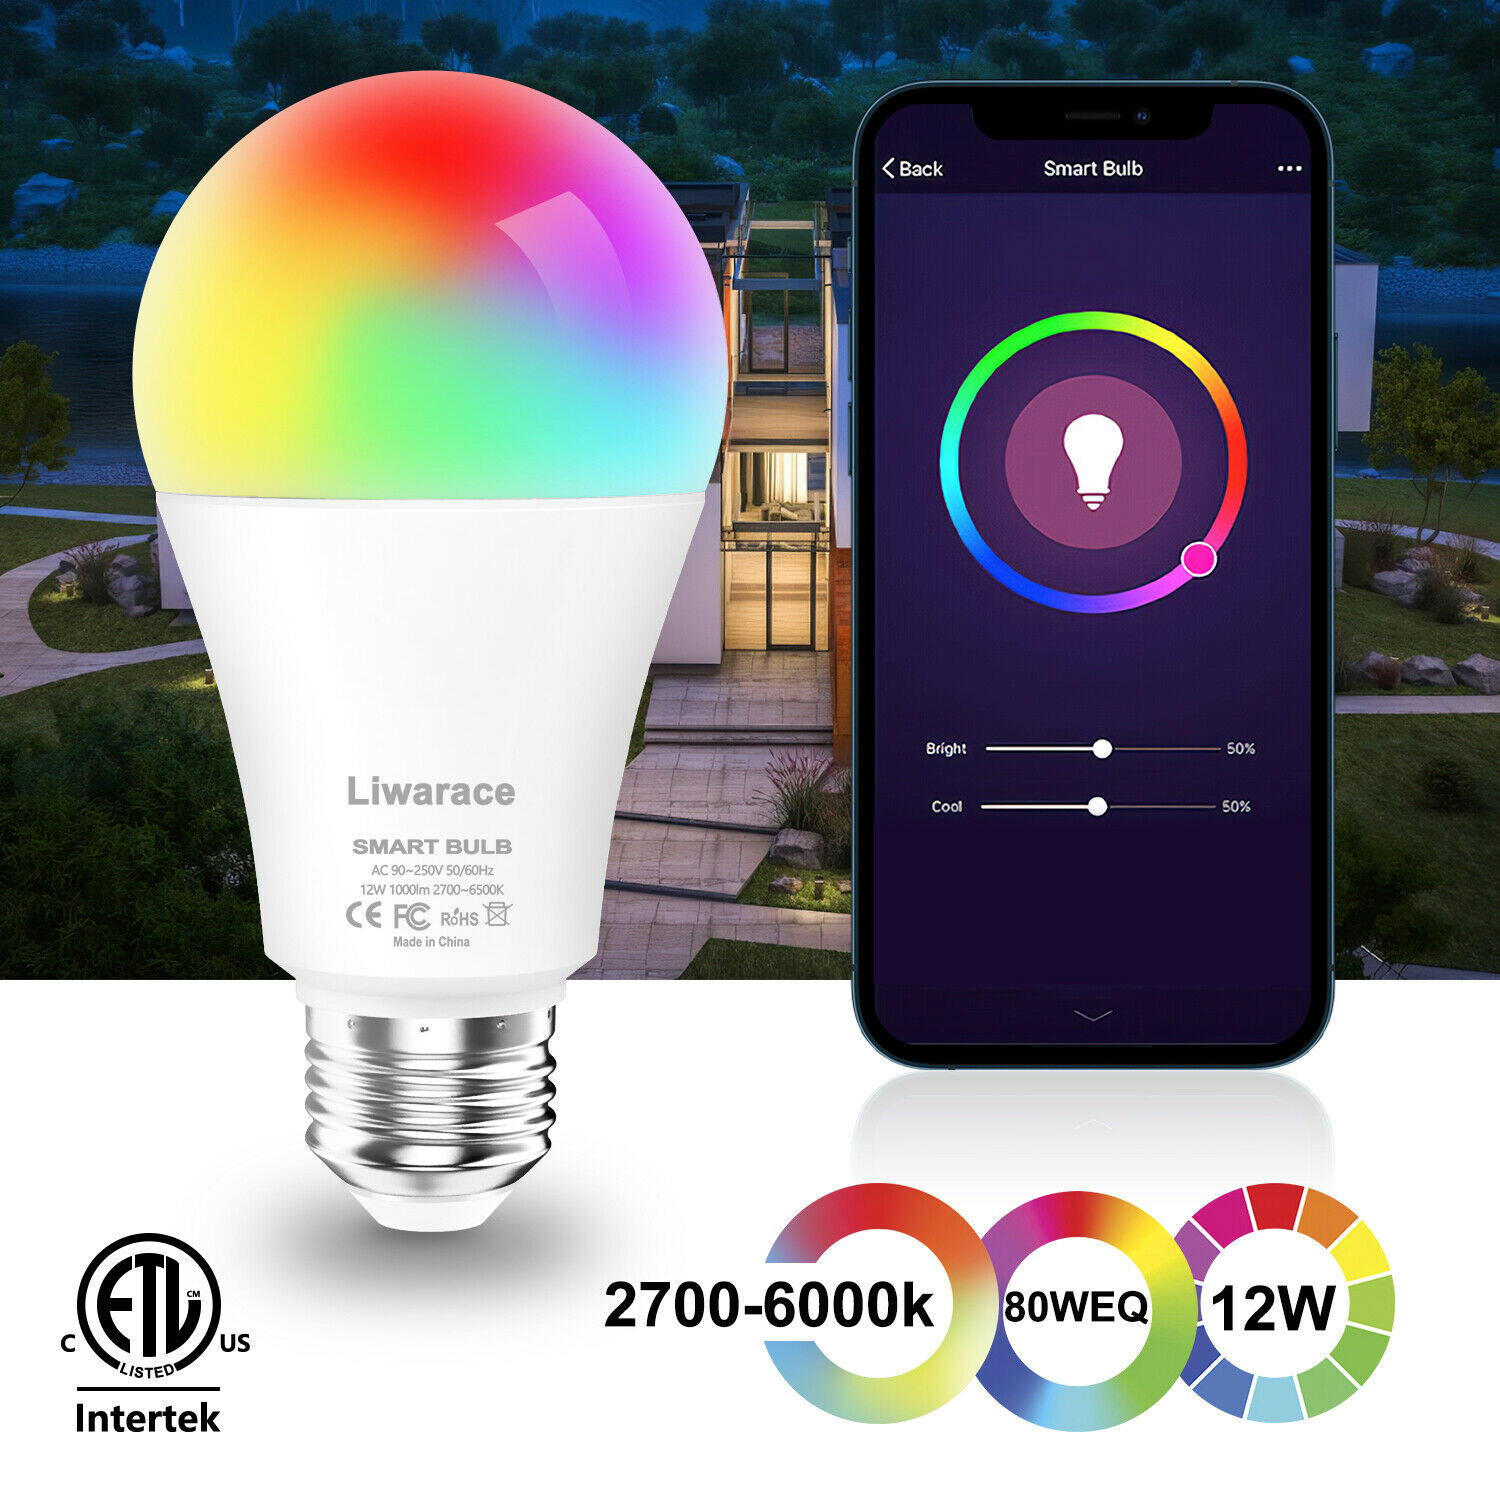 Smart Led Light Bulb 5W WiFi Smart Bulb Cool to Warm White Dimmable LED Light in A19 E26 Base Smartphone App Controlled Compatible with Alexa & Google Home No Hub Required 